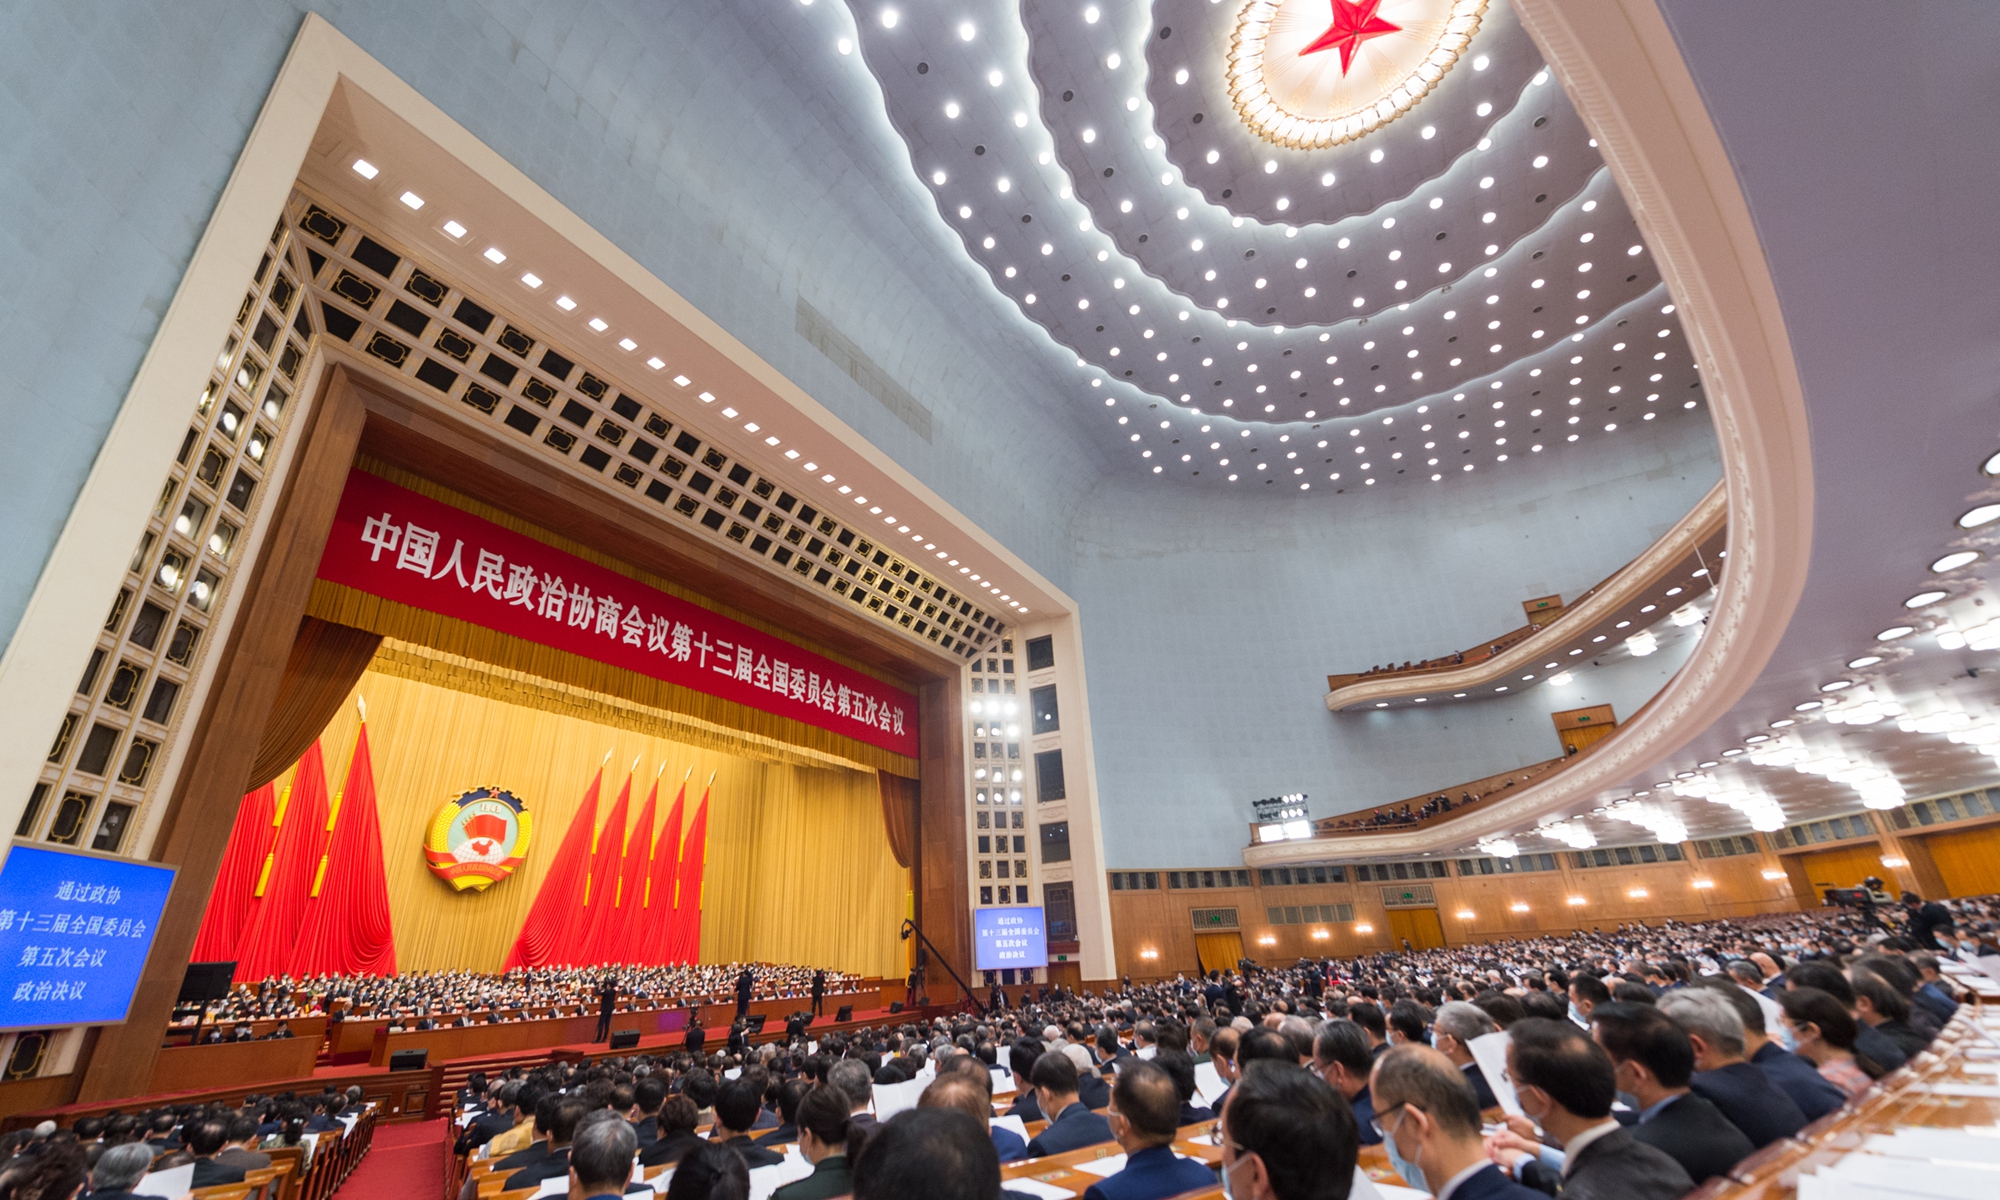 The closing ceremony of the fifth session of the 13th National Committee of the Chinese People's Political Consultative Conference is held at the Great Hall of the People in Beijing on March 10, 2022. Photo: cnsphoto